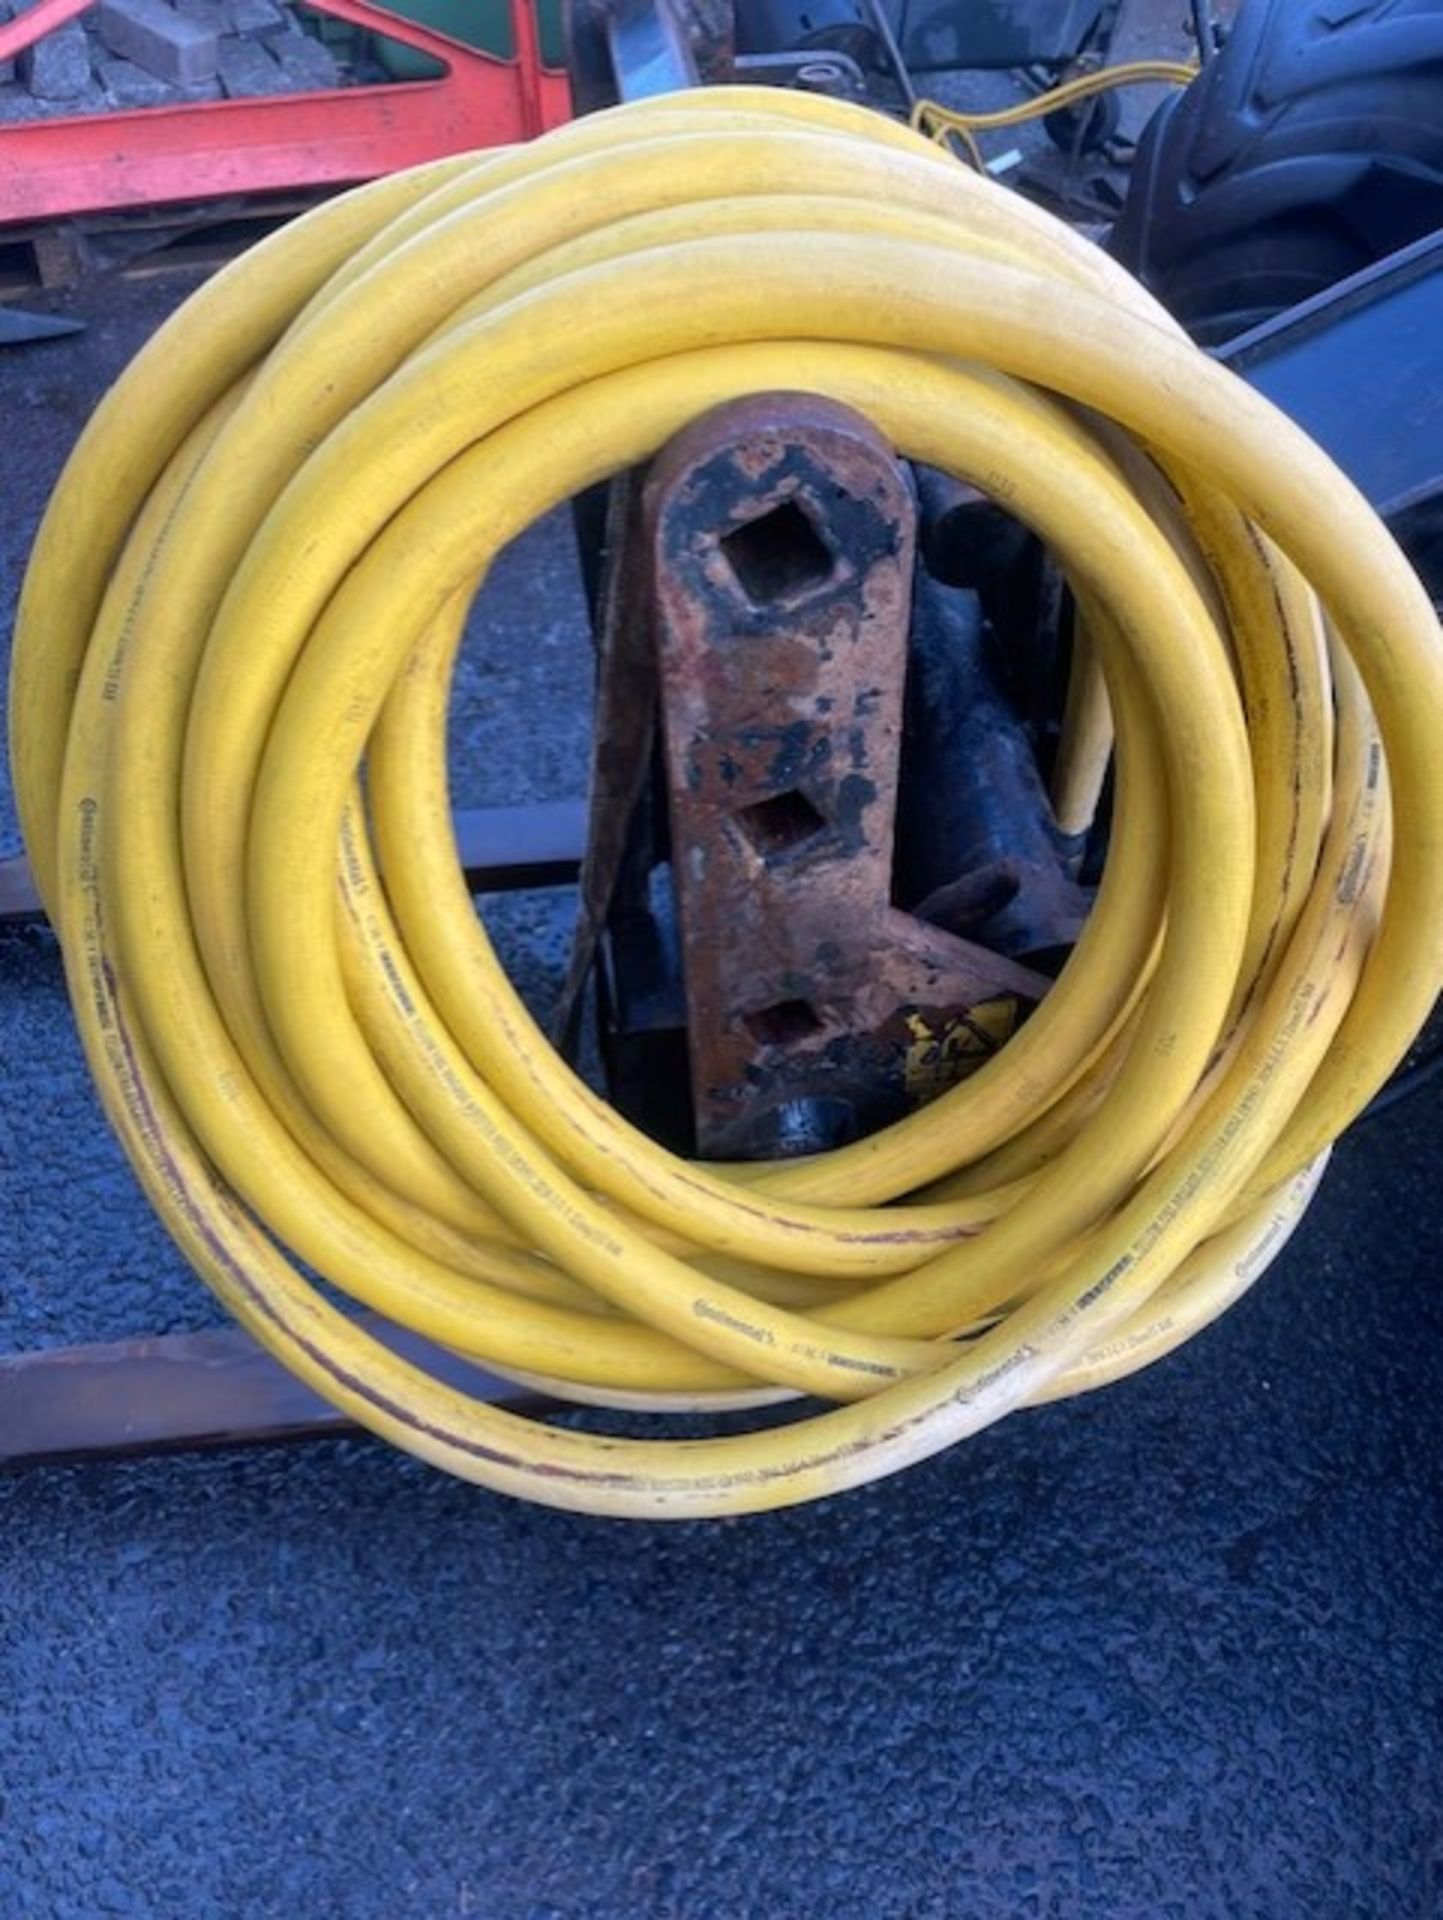 Continental fire brigade hose 20 metres in length with coupler very good strong hose. No more